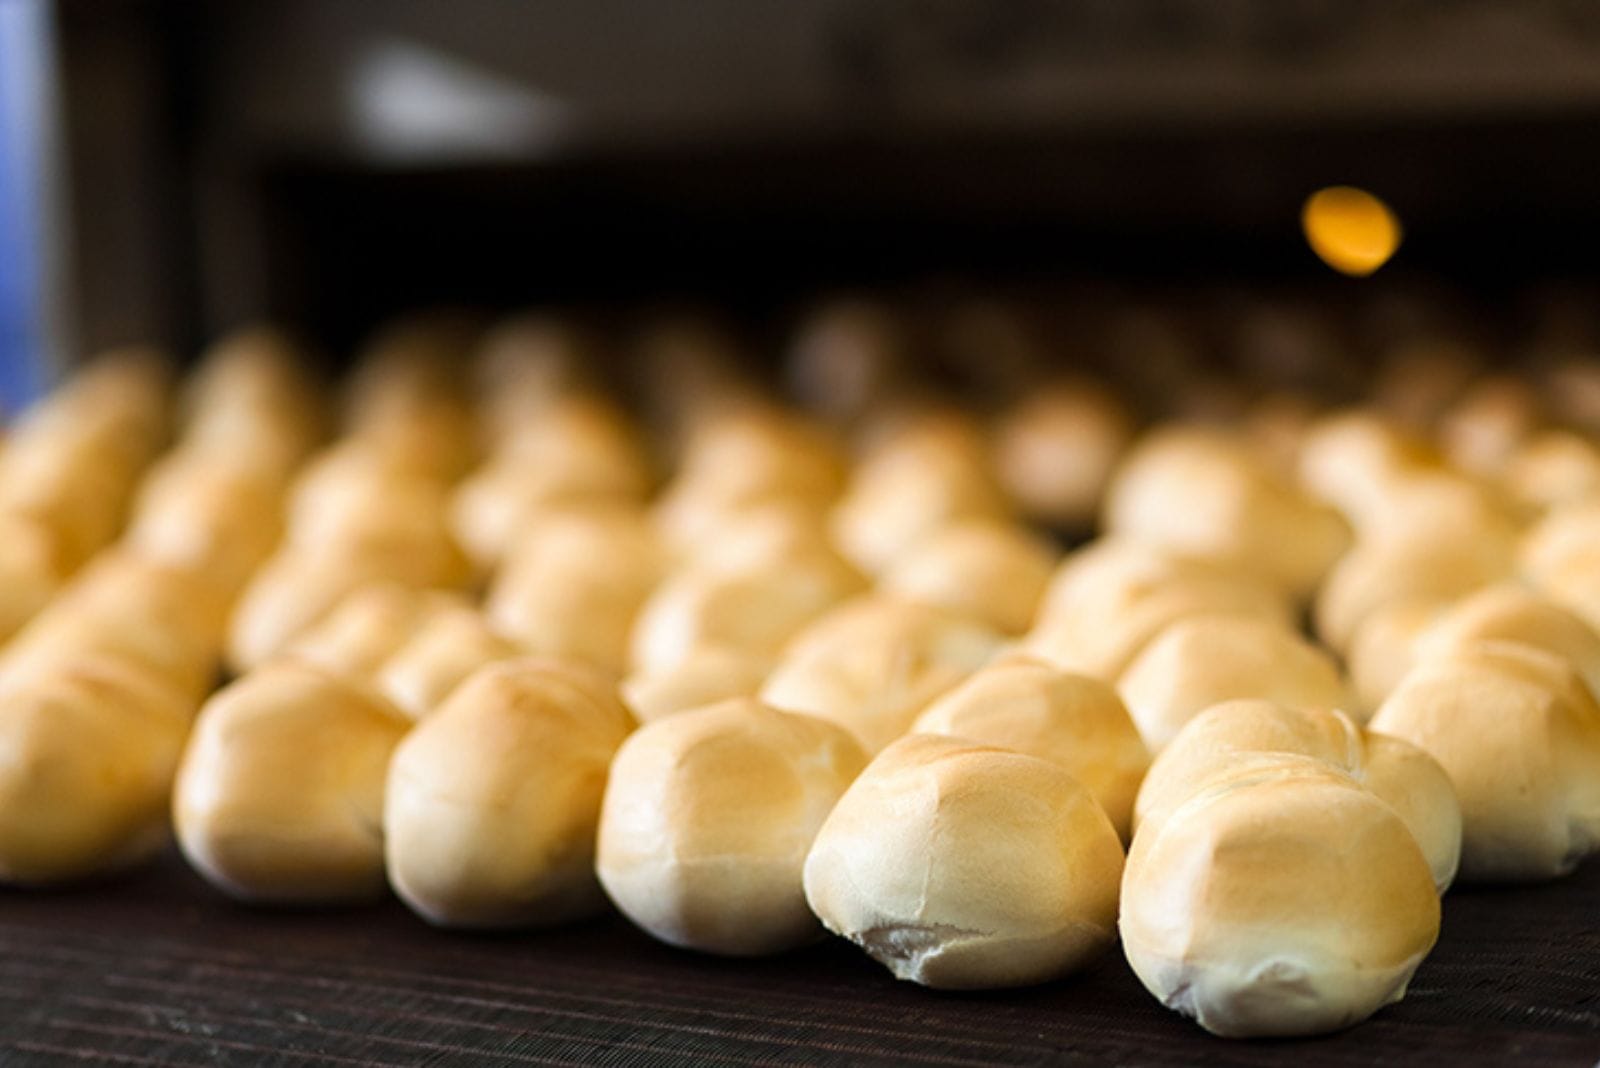 dinner rolls coming out of a commercial oven